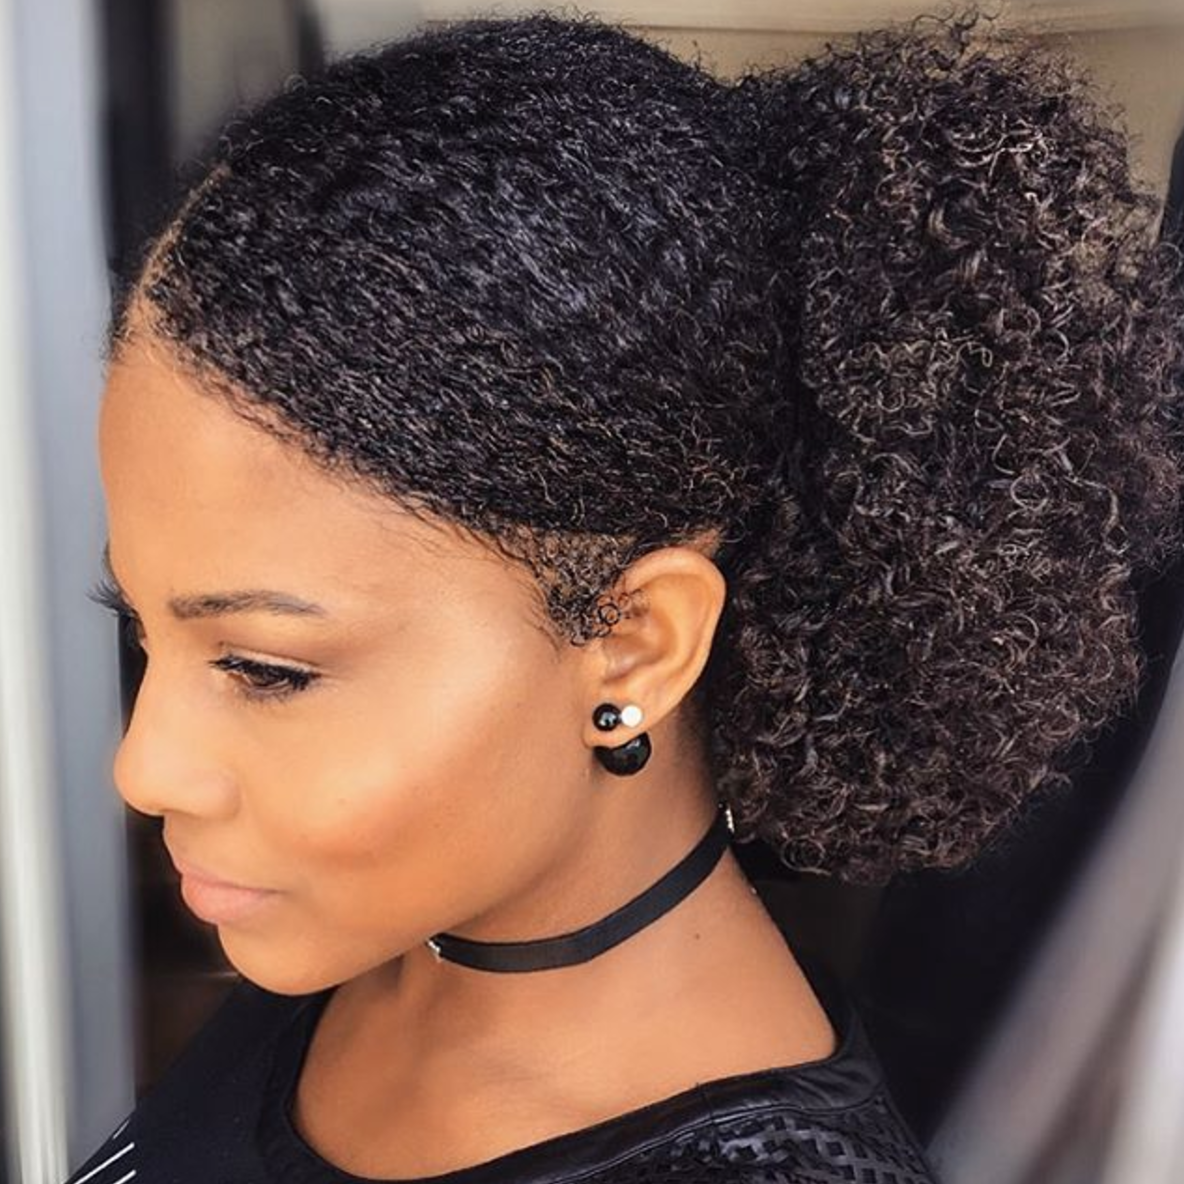 8 Easy Protective Hairstyles For Short Natural 4C Hair That Will Not Damage  Your Edges  African American Hairstyle Videos  AAHV